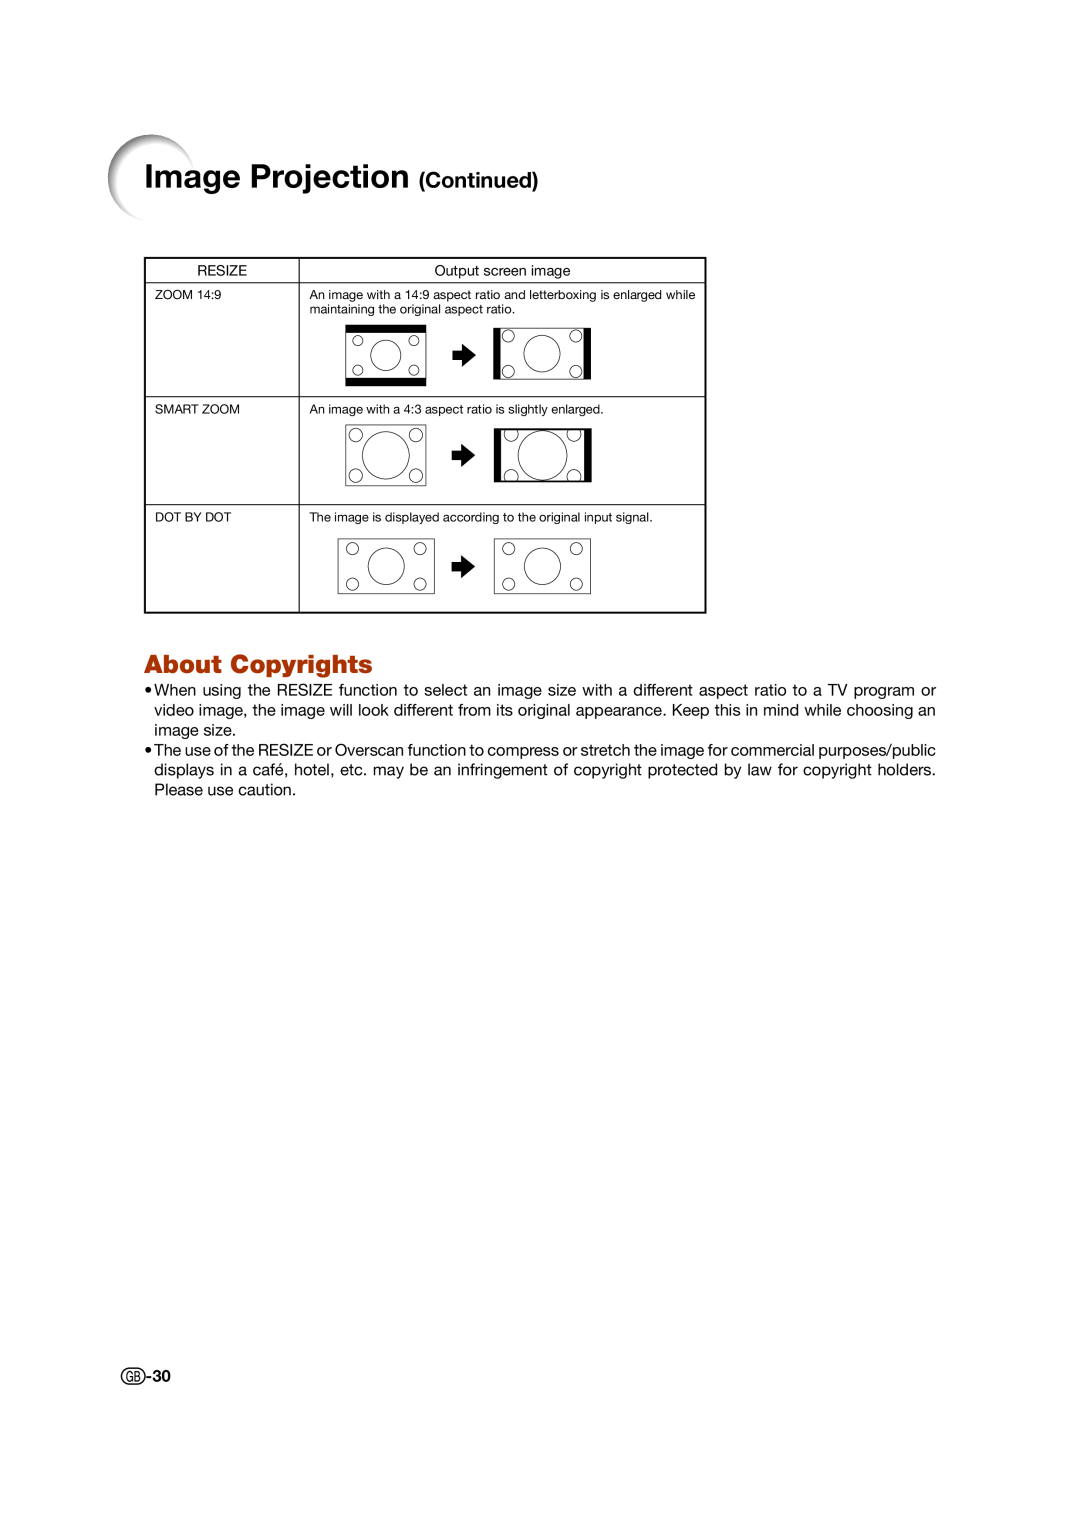 Sharp XV-Z15000 operation manual About Copyrights, Image Projection Continued 